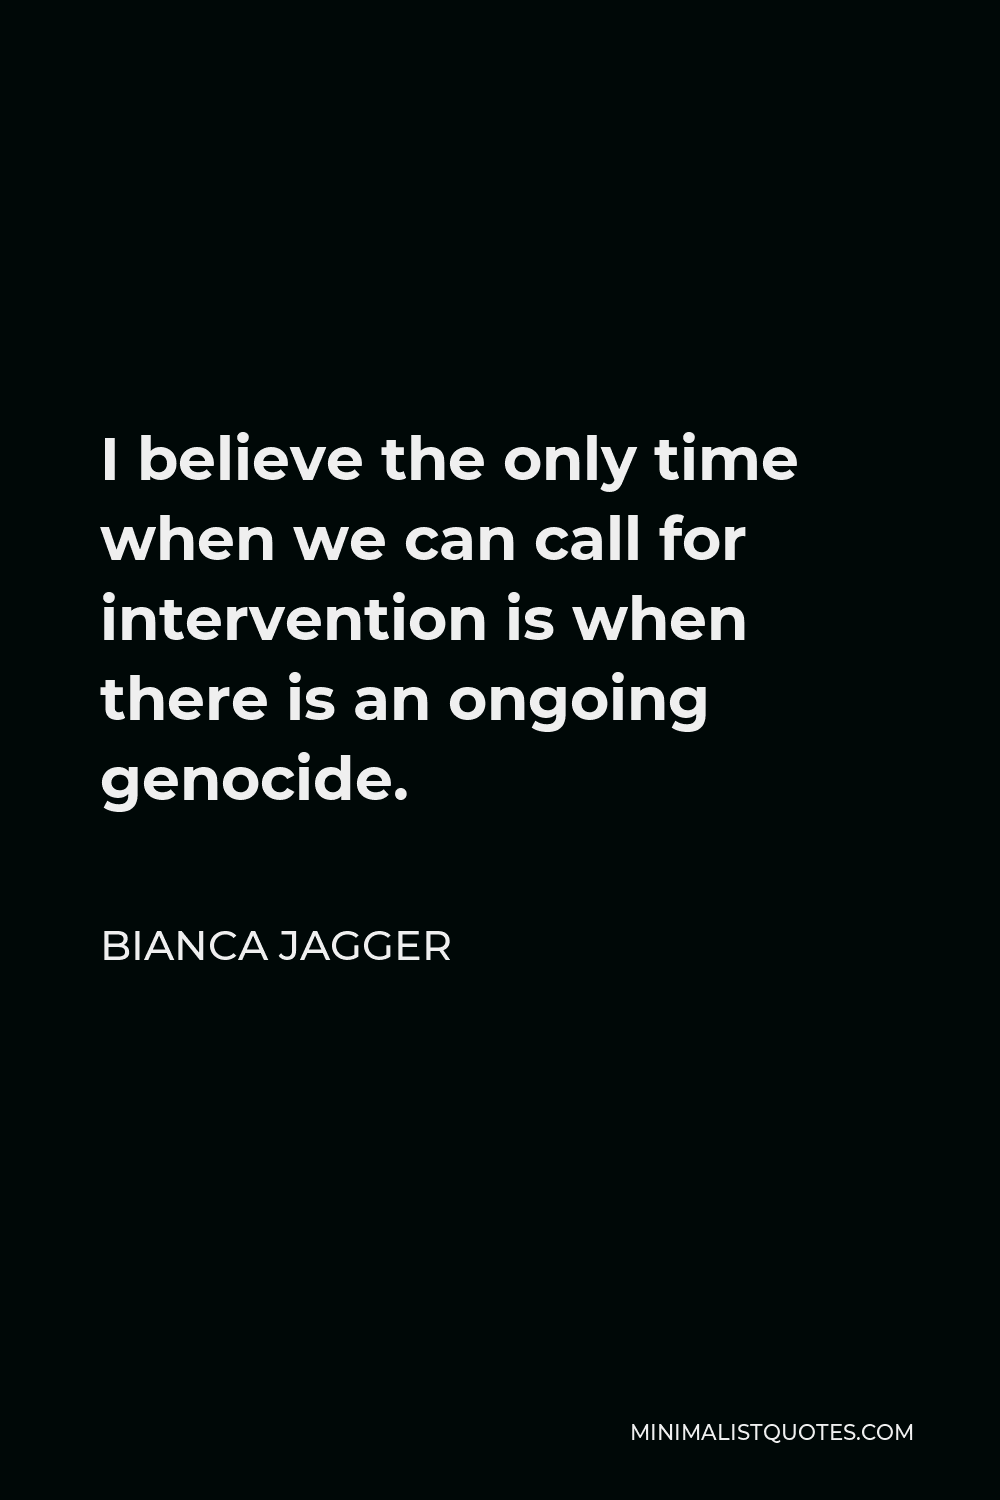 Bianca Jagger Quote - I believe the only time when we can call for intervention is when there is an ongoing genocide.